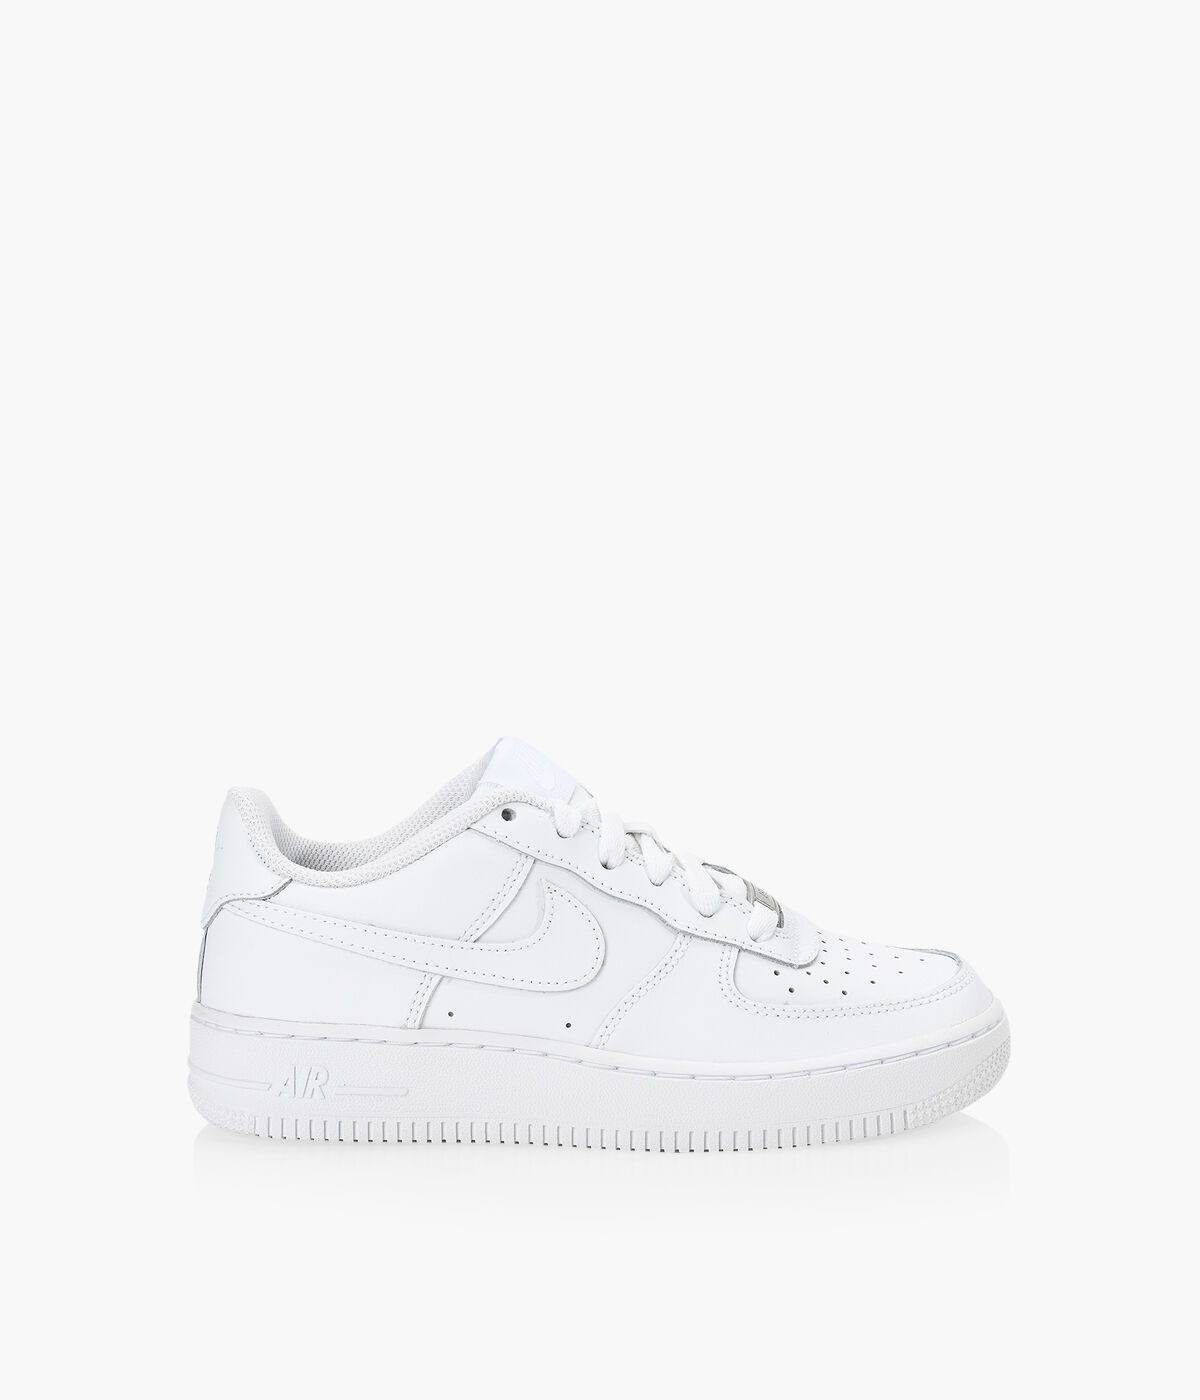 white air force ones on sale